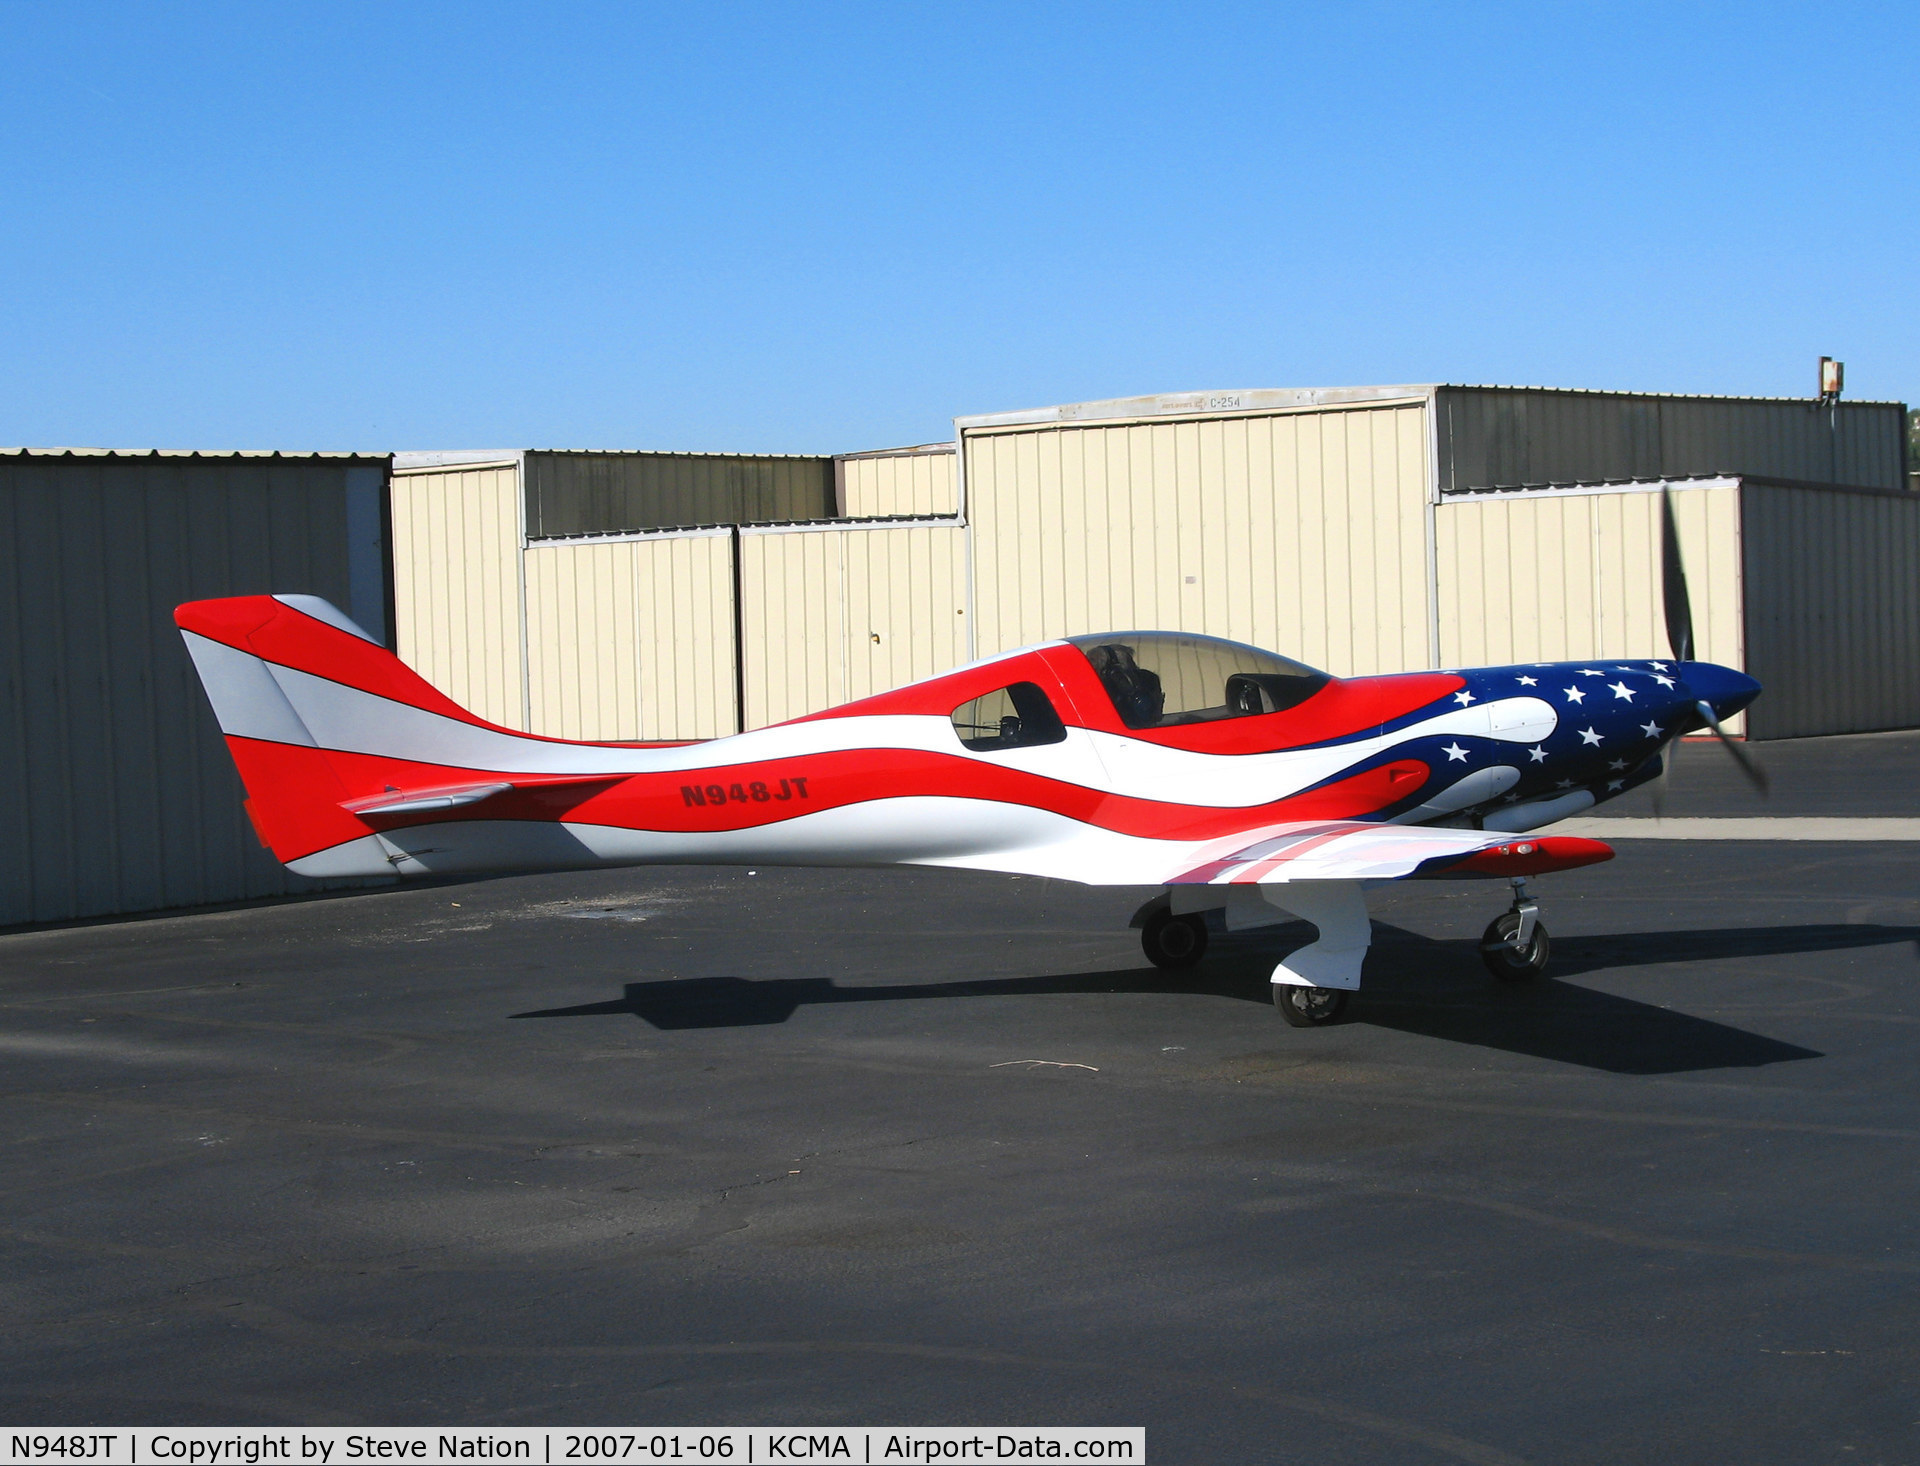 N948JT, 2000 Lancair 360 C/N 001 (N948GT), Locally-based 2000 T360 home built taxis for EAA-sponsored Young Eagle flight at KCMA